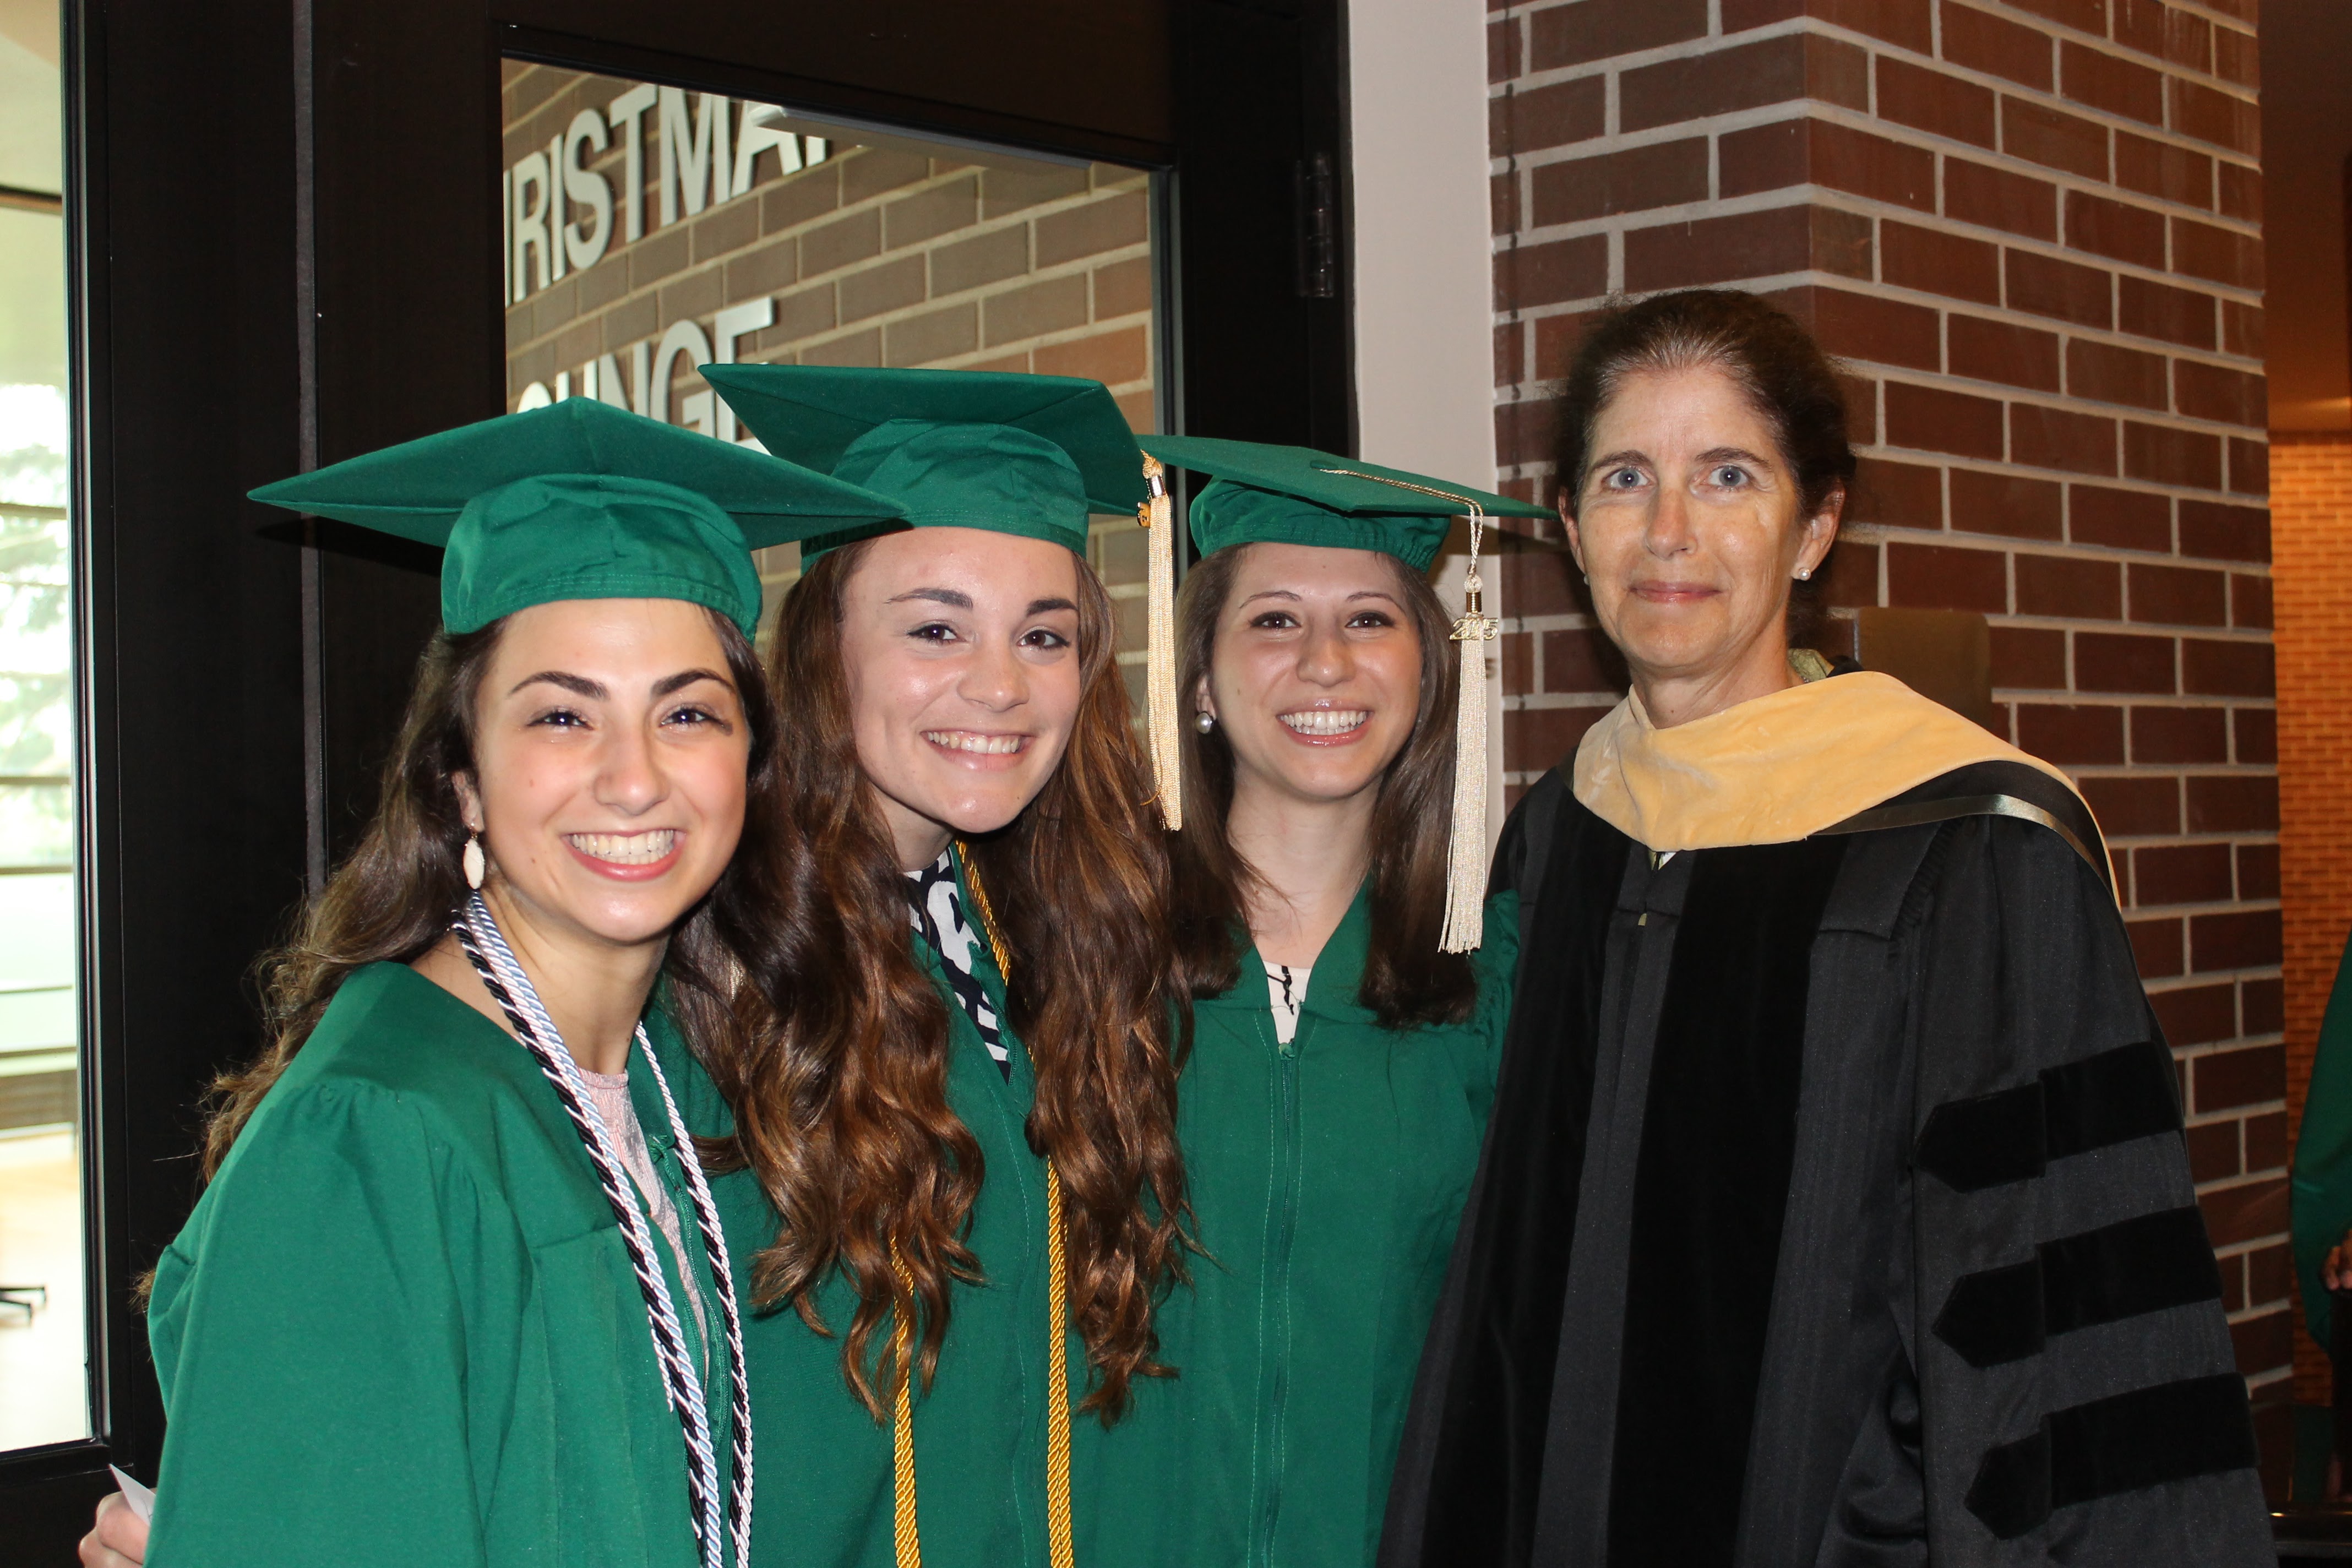 Connie Hunt with graduates in gowns